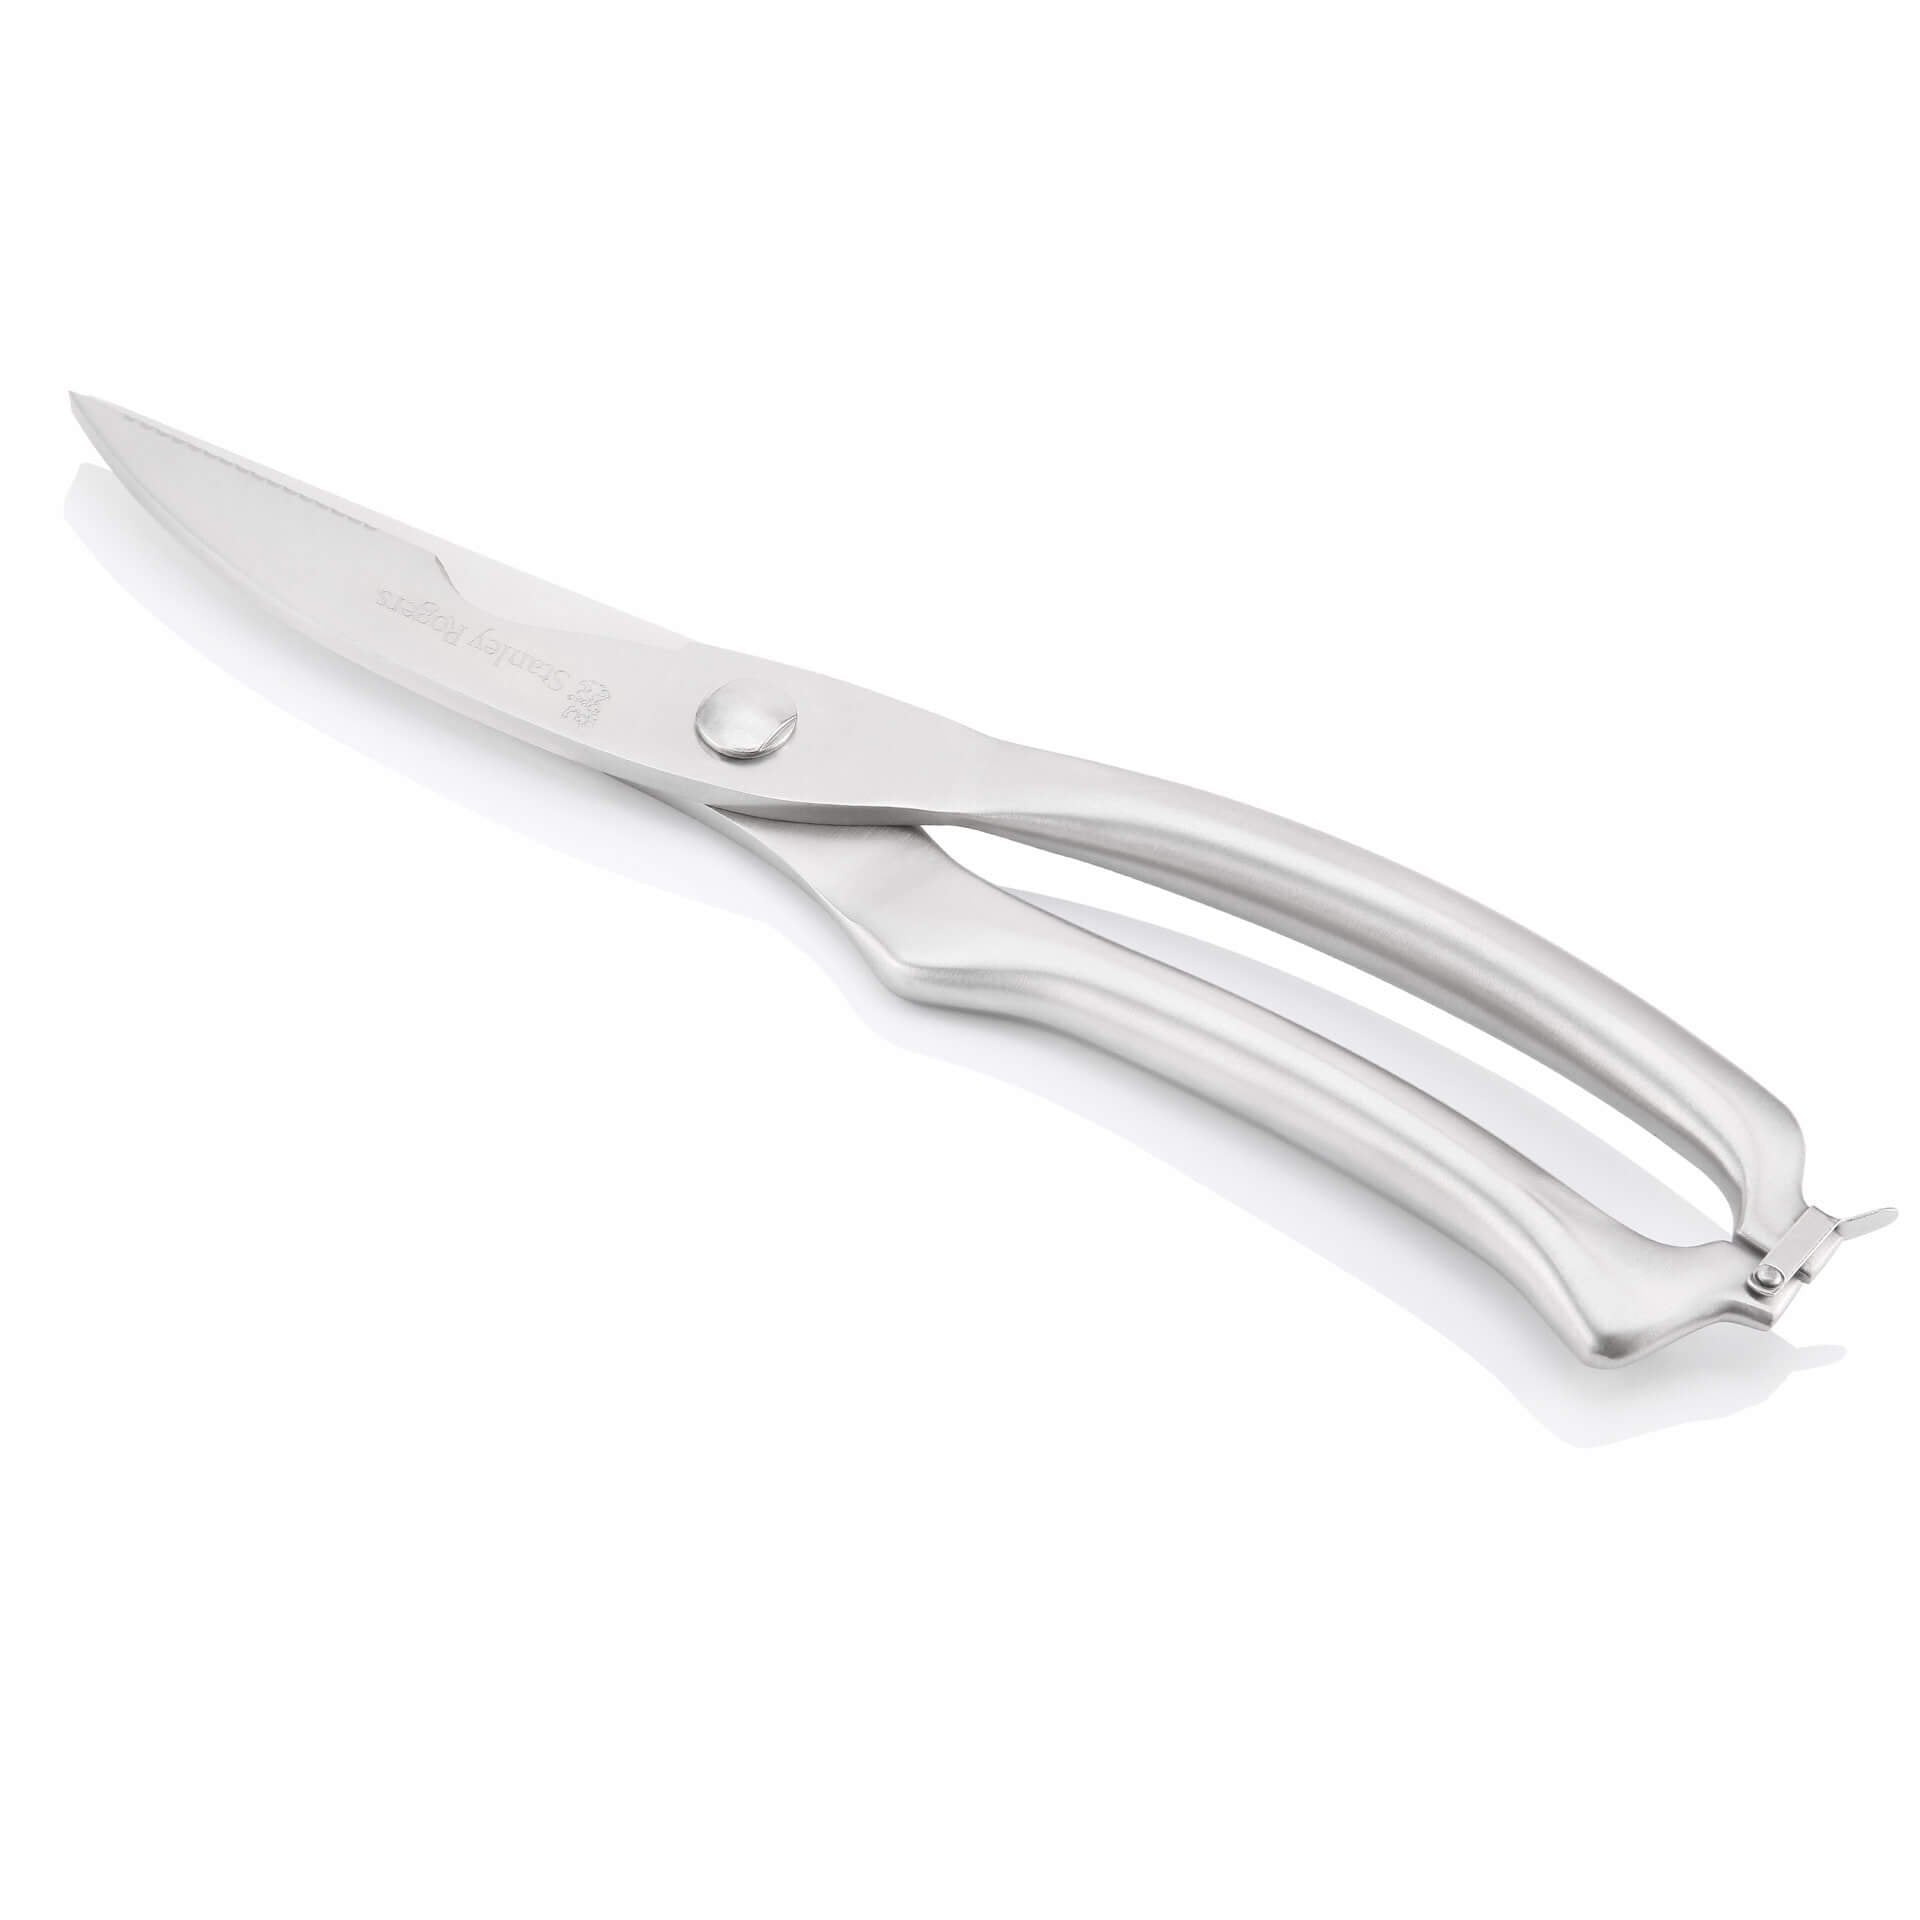 Stanley Rogers Poultry Scissors, Stainless Steel